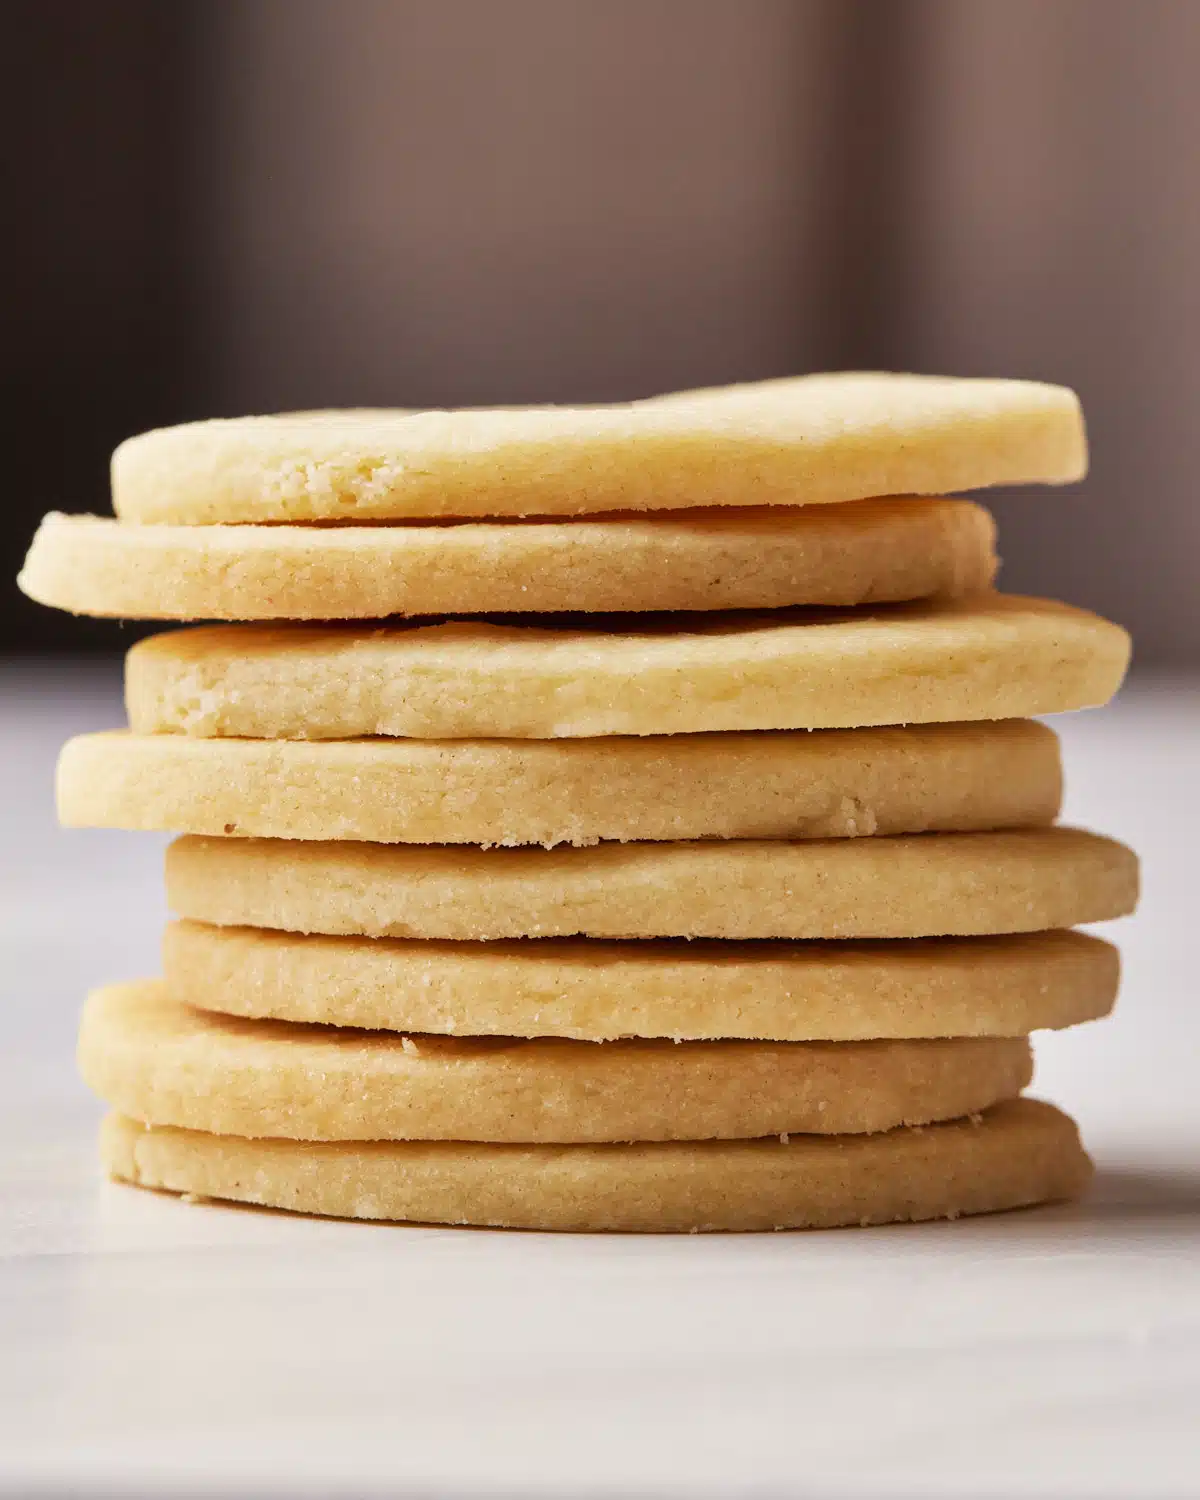 Stack of sugar cookies from the side.